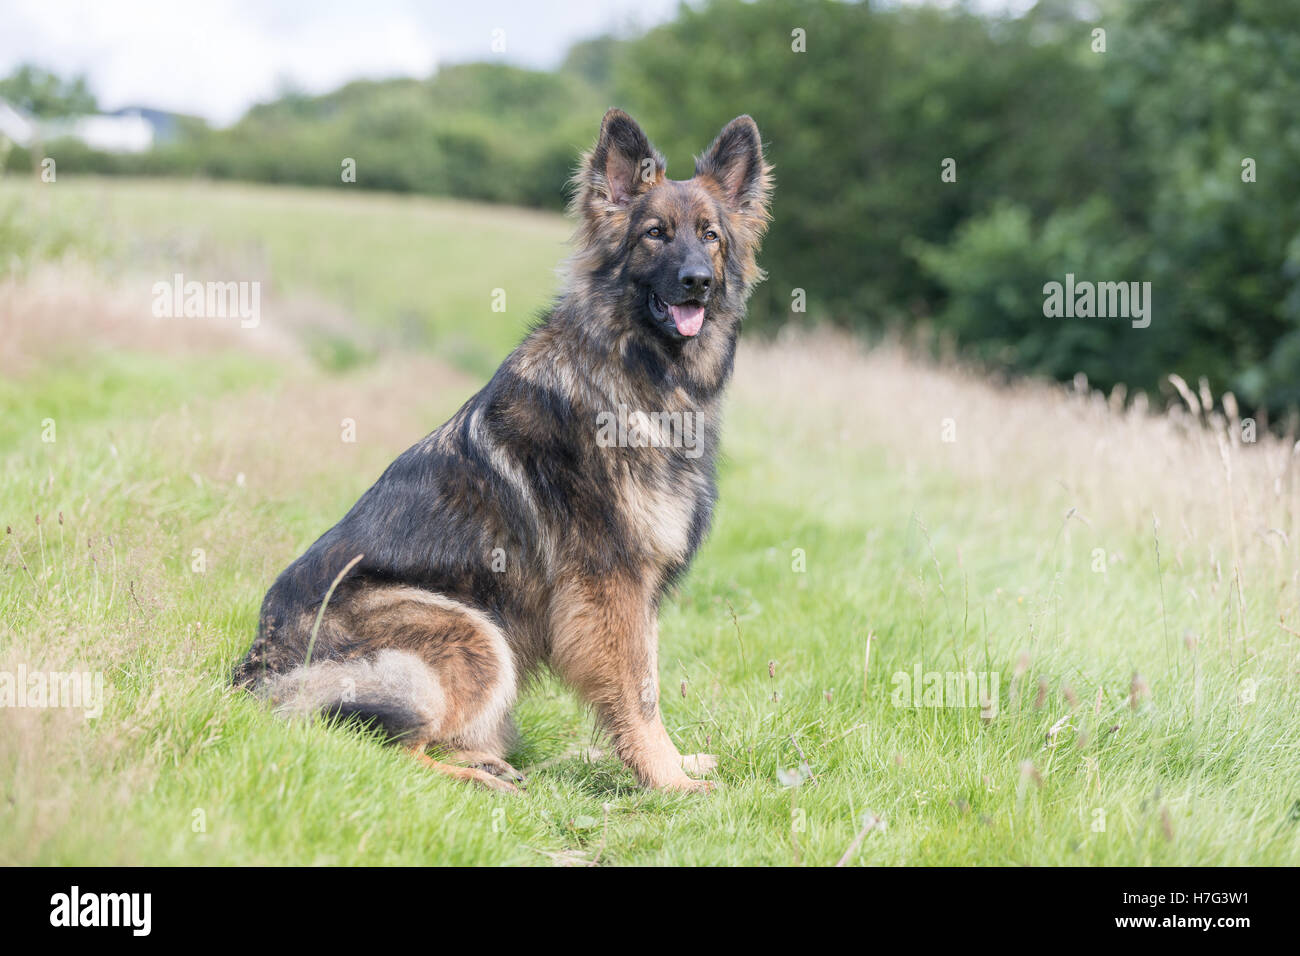 Big dog sat obediently outside waiting for his daily walk to continue Stock Photo